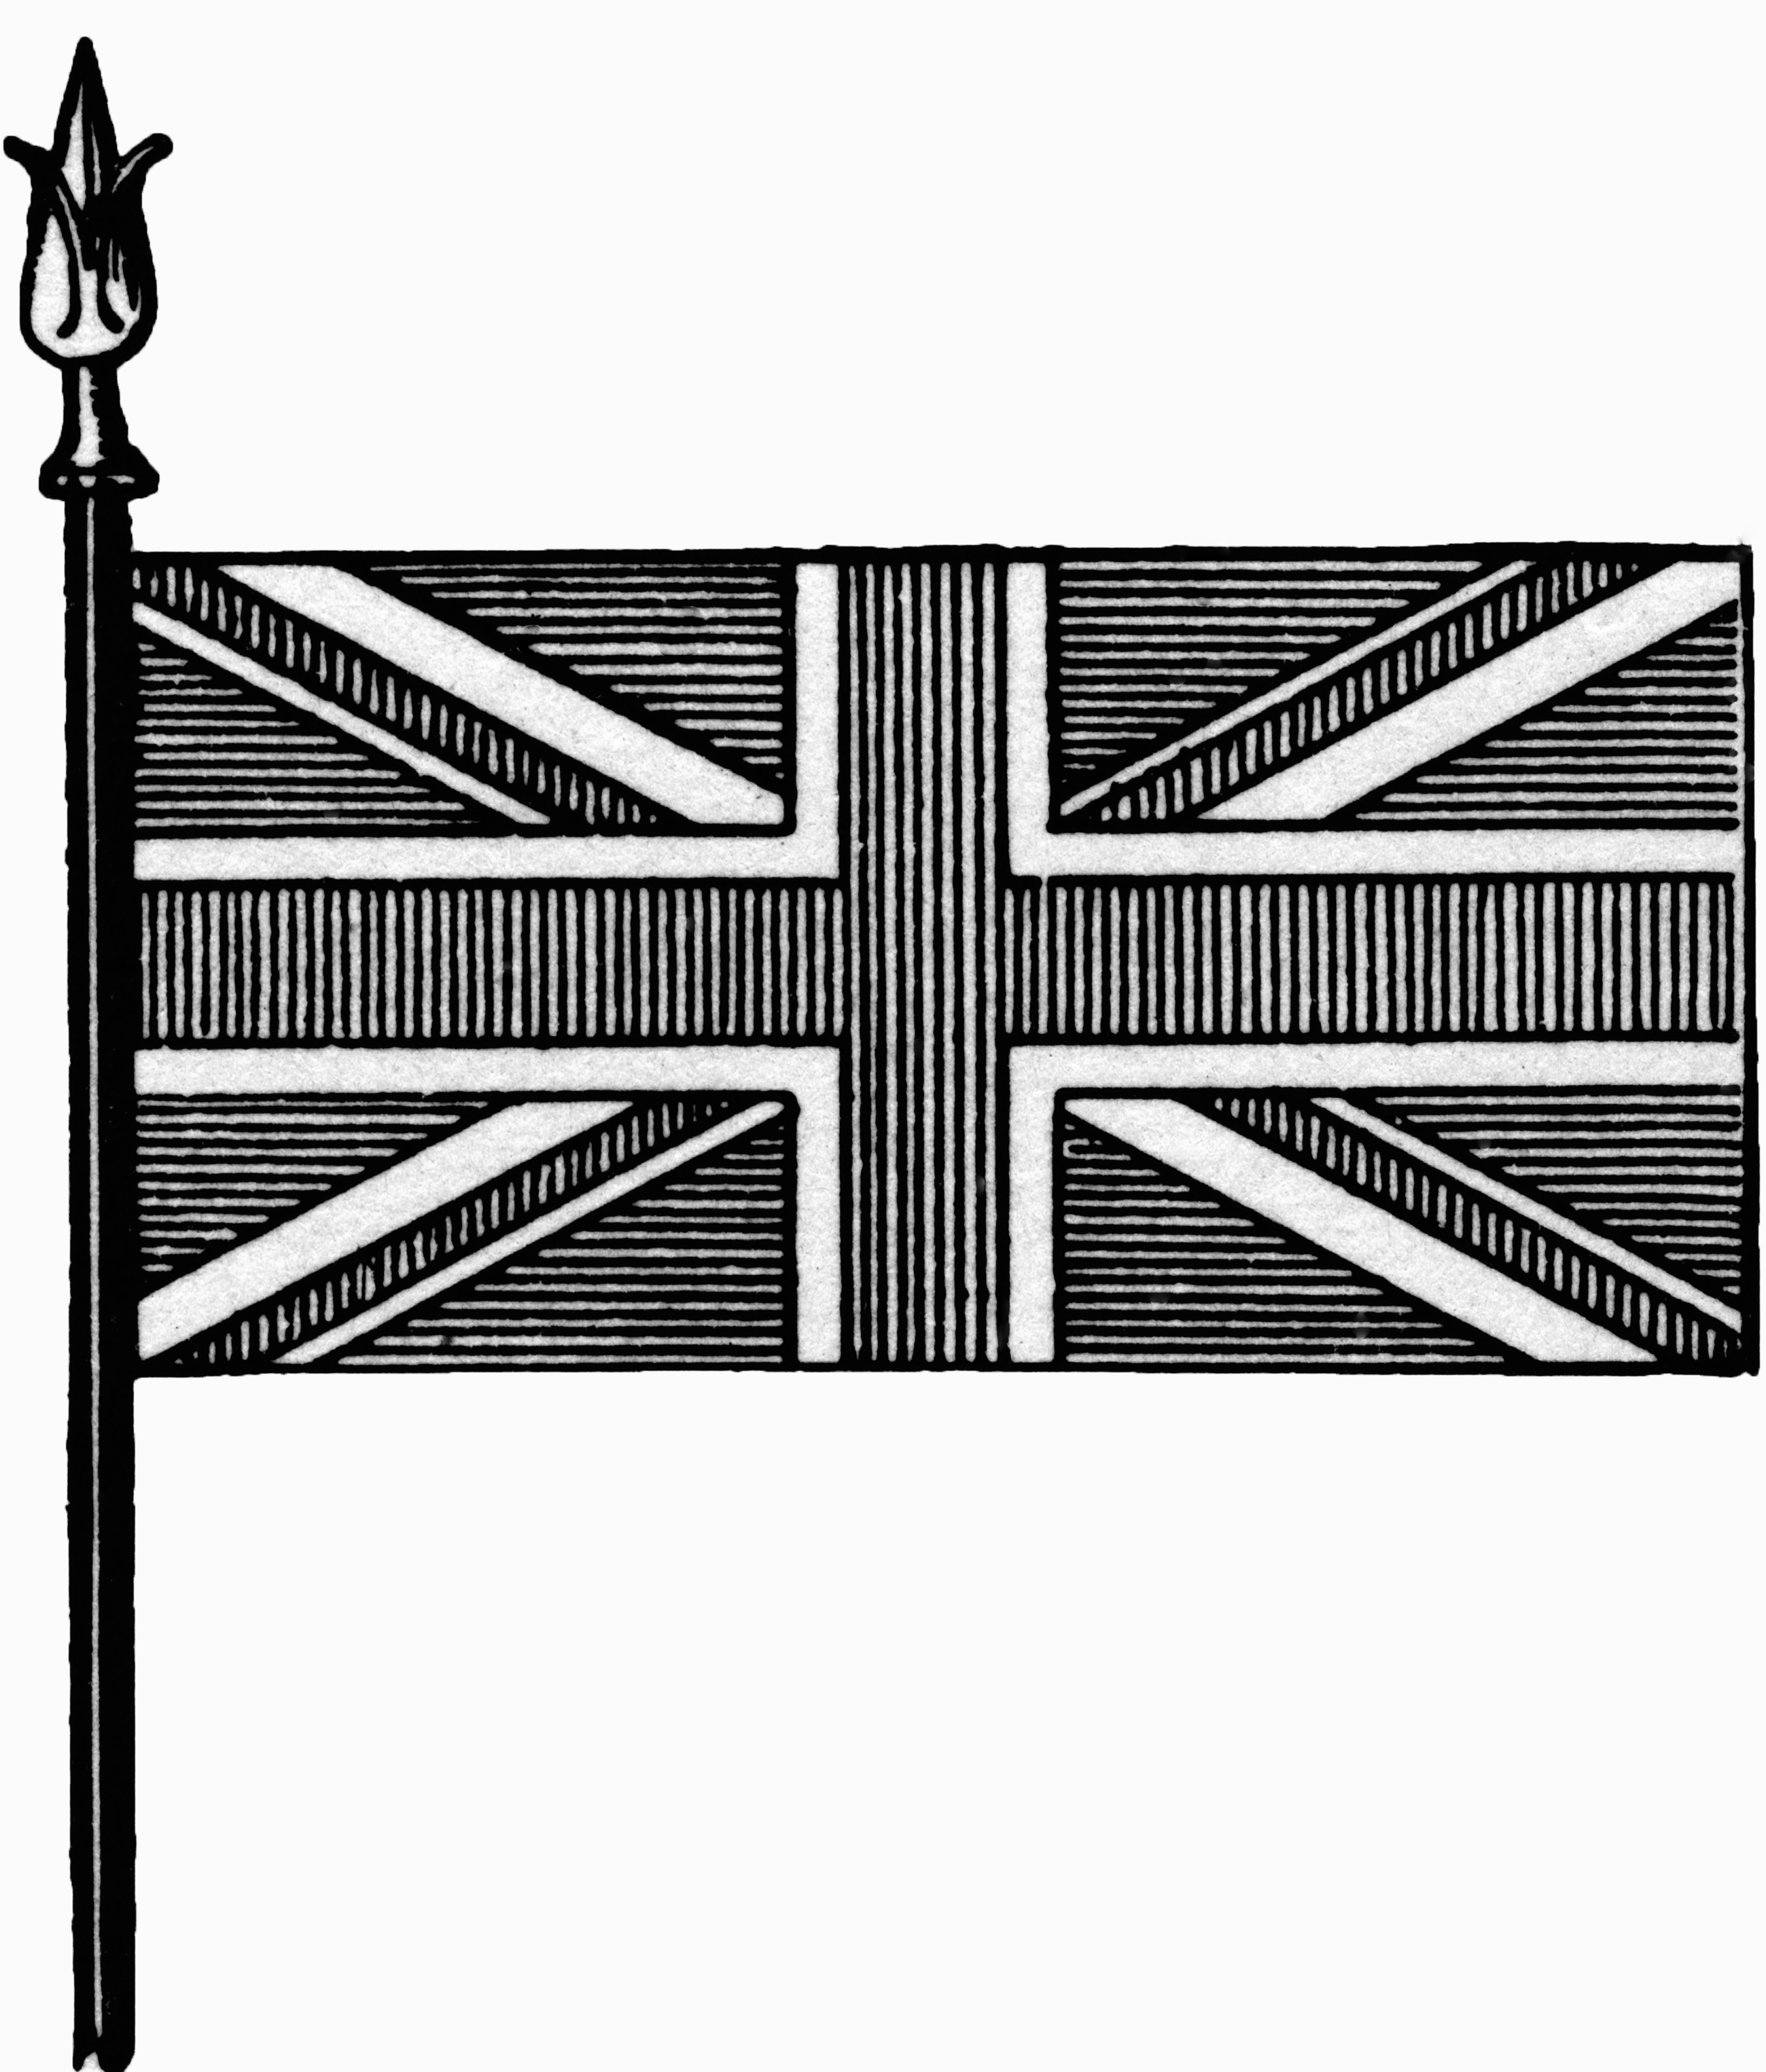 Union (National) Flag of Great Britain | ClipArt ETC